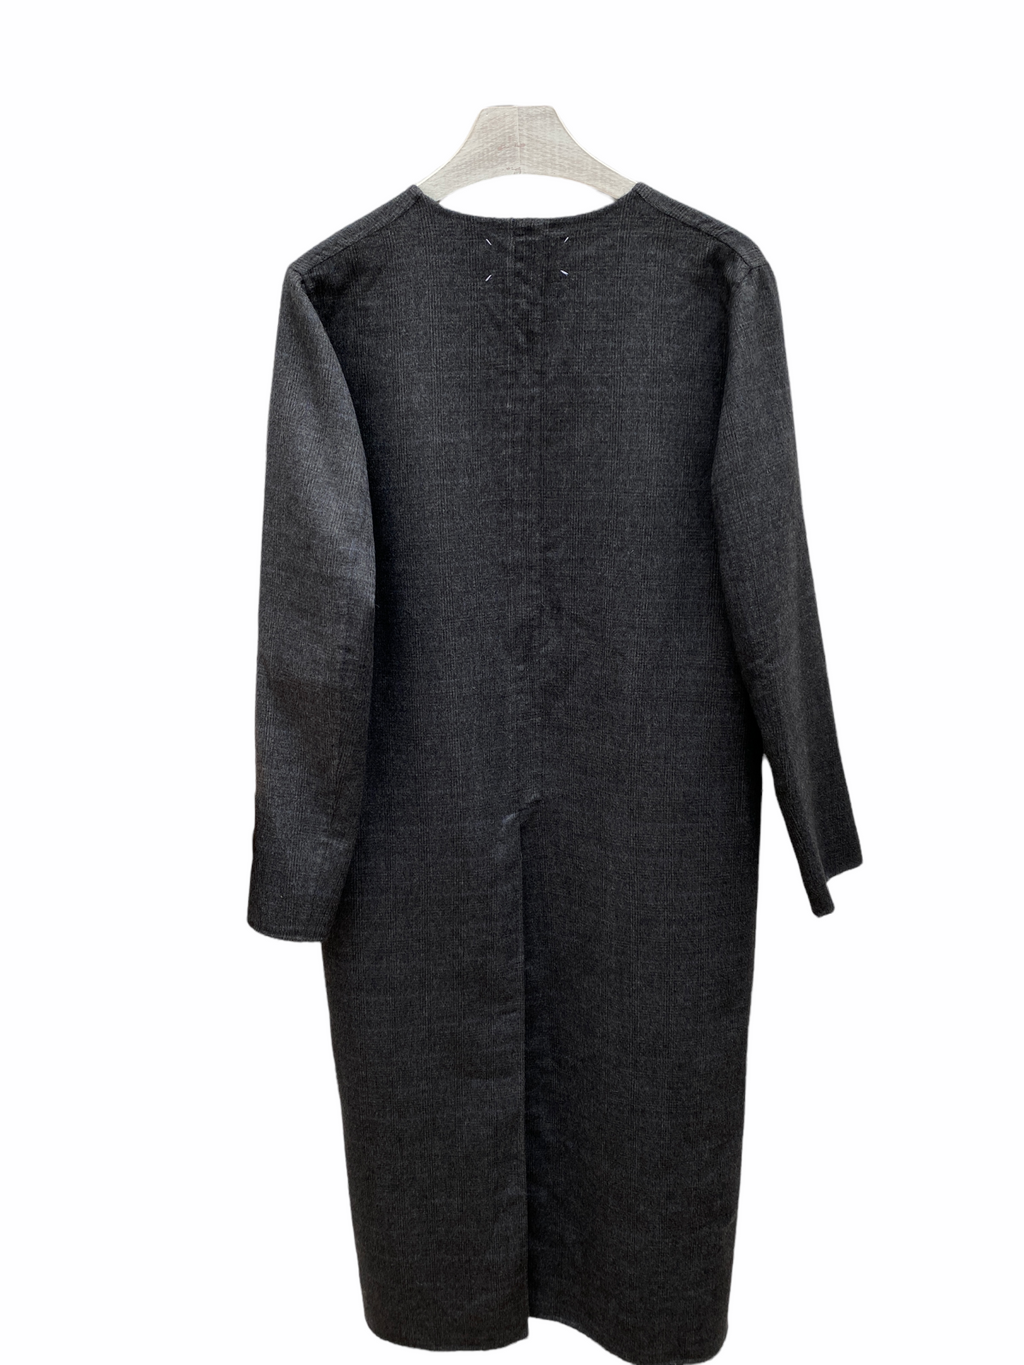 SS 2015 Grey Checkered Cashmere Lab Coat